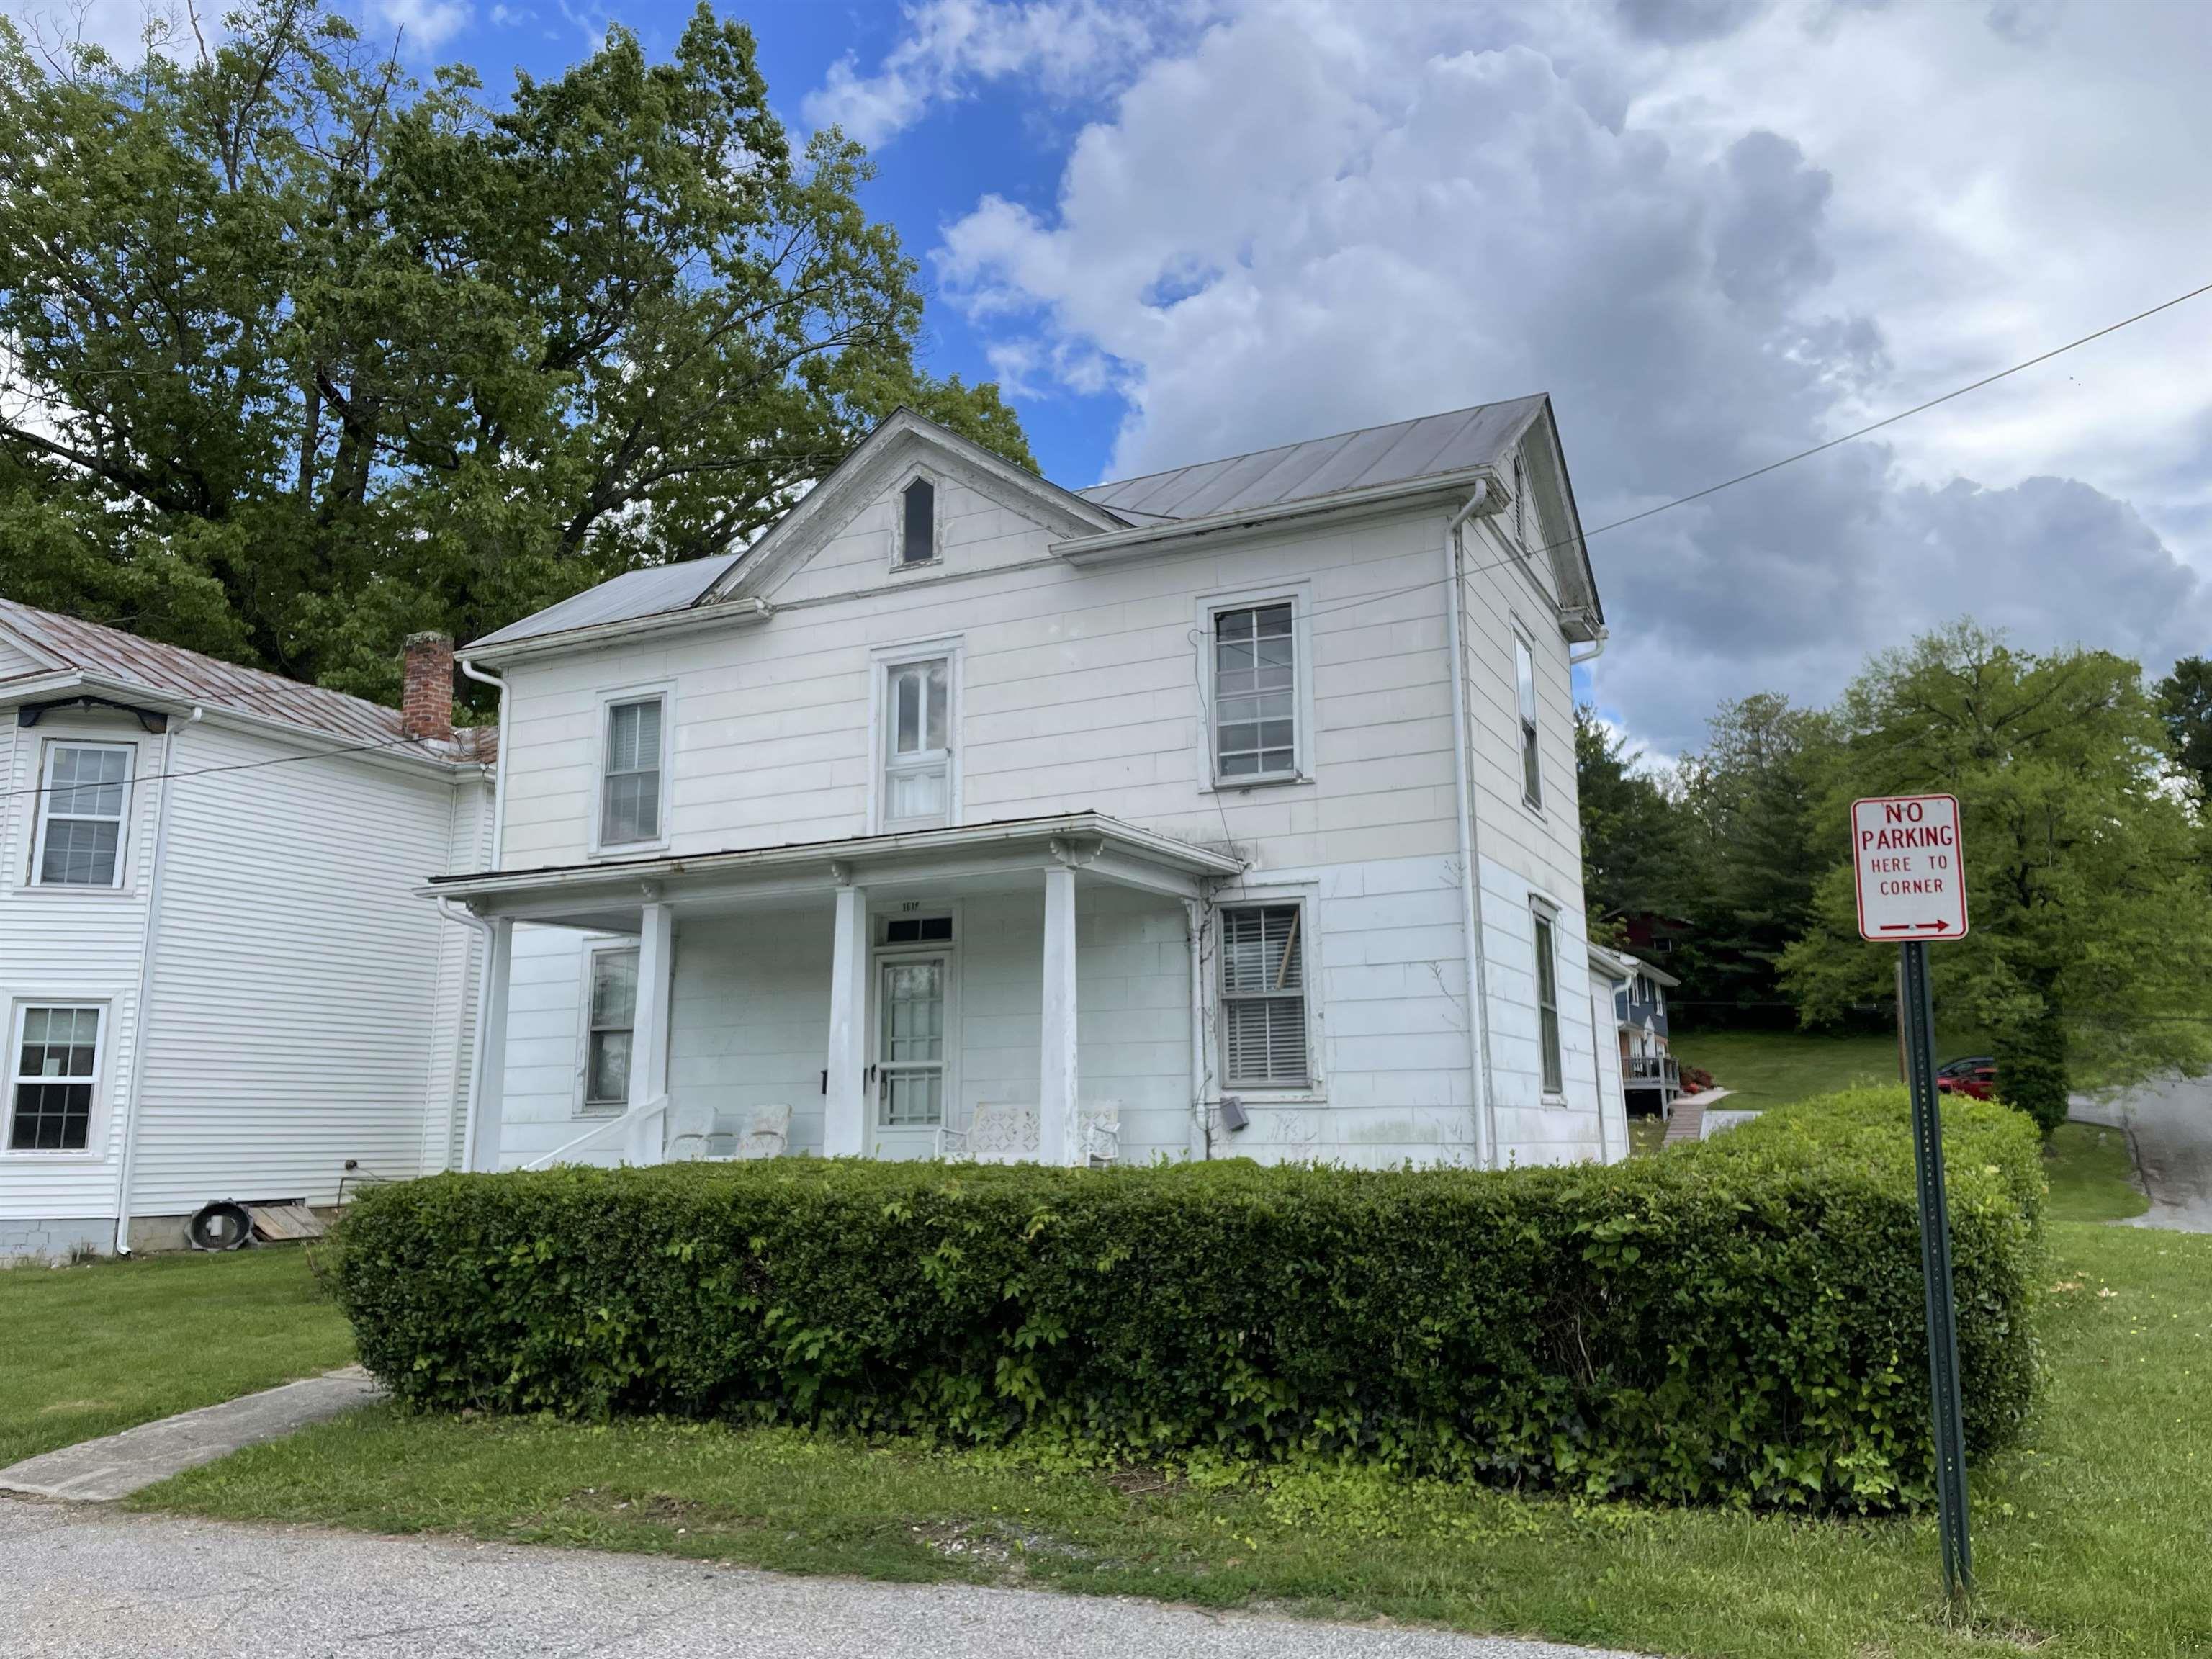 This house is on a corner lot and convenient to Radford University. It has a lot of character and charm but needs considerable repair and updating. This would make an excellent project for restoration and/or investment.